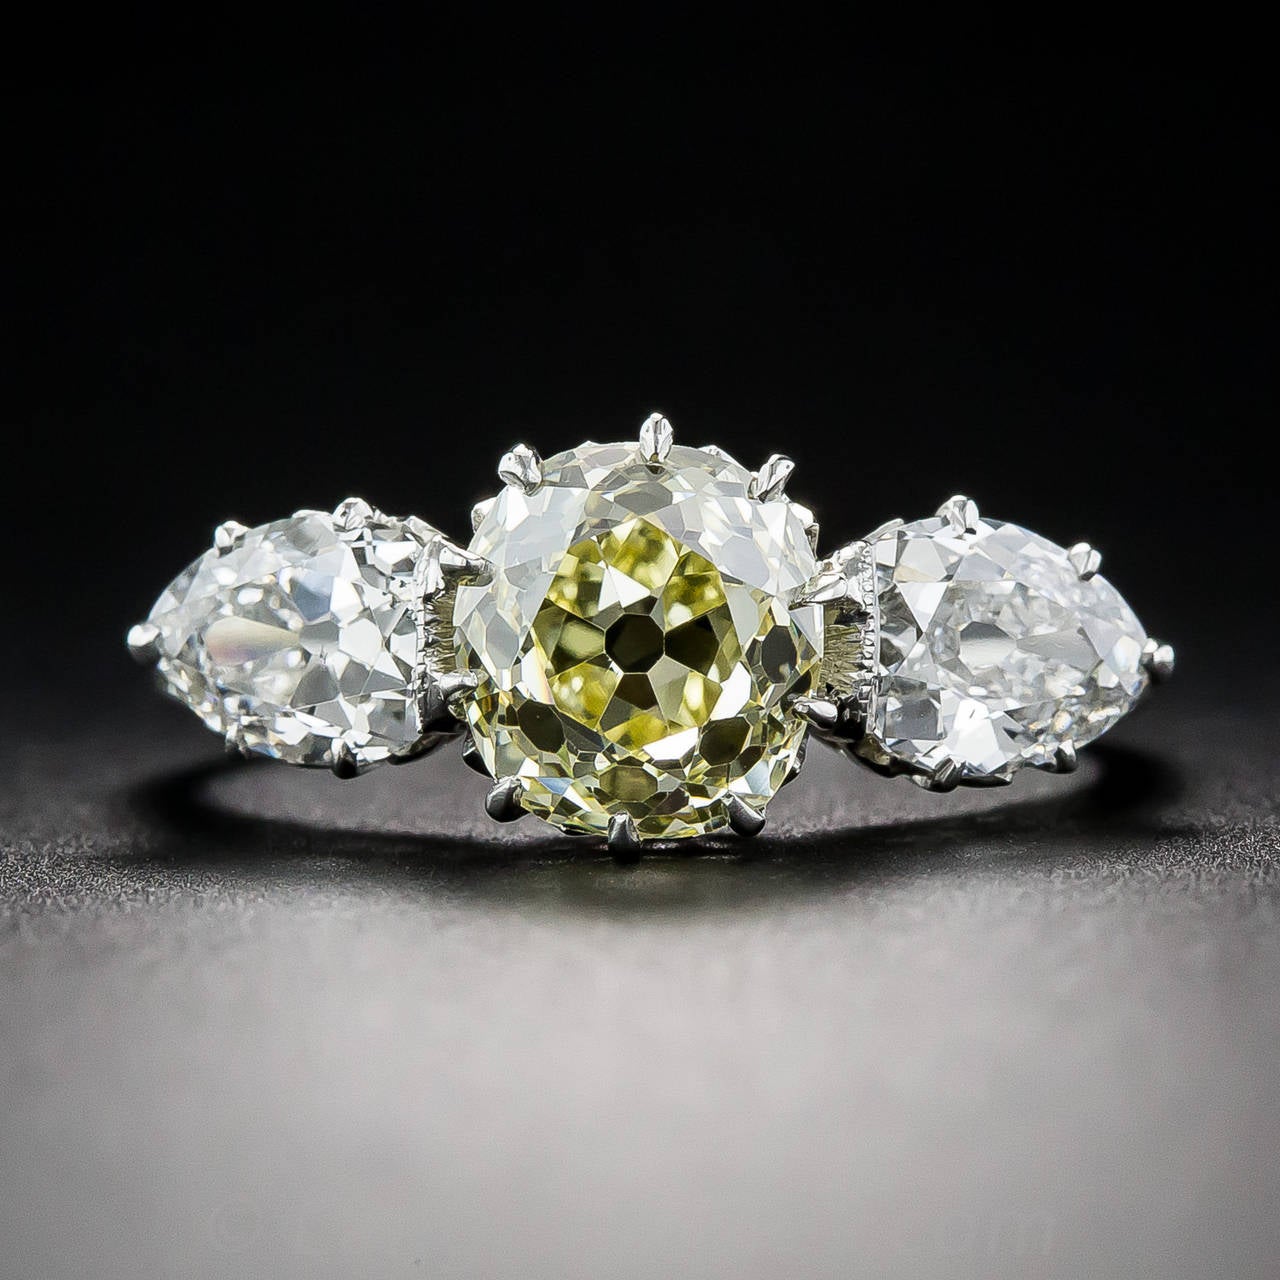 The central focus of this rare, ravishing and radiant Edwardian treasure, circa 1915, is a 1.81 carat antique cushion-cut diamond, graded Fancy Intense Yellow - VS1 clarity by the GIA Gemological Trade Laboratory. The beautiful natural colored